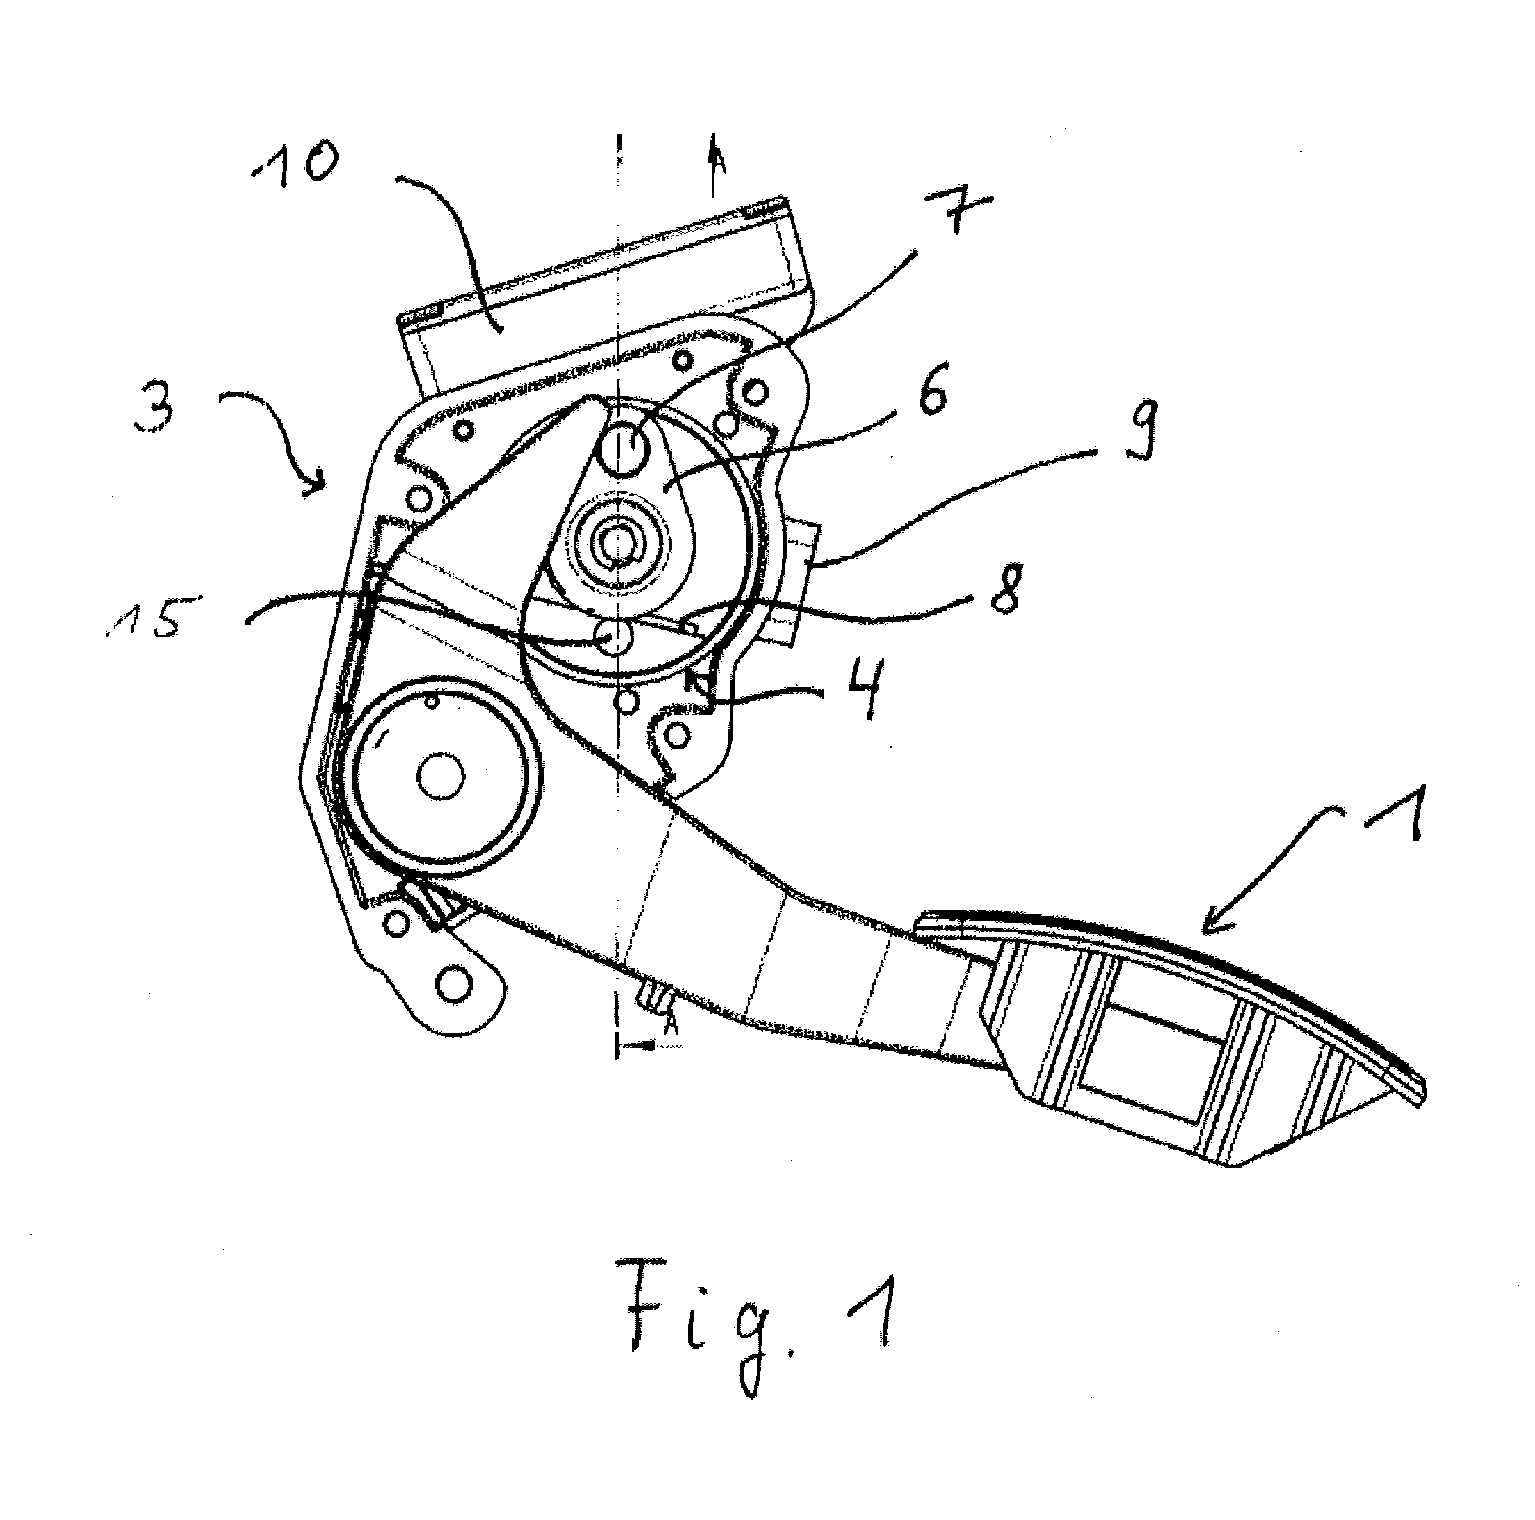 Compact pedal system for a motor vehicle